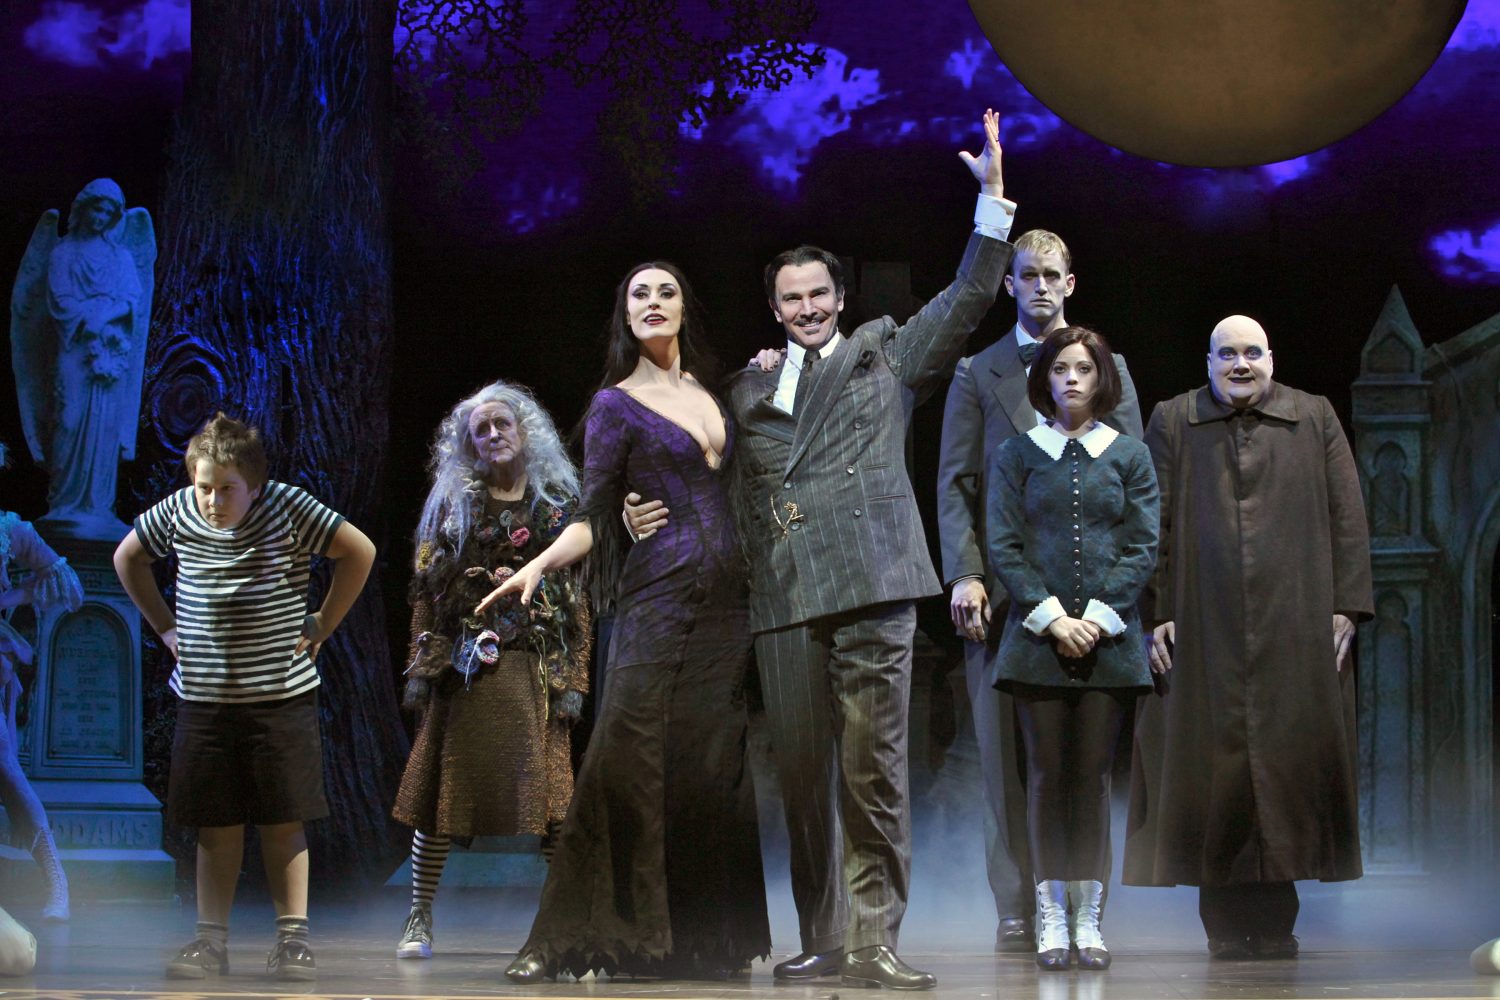 Courtesy of Jeremy Daniel. “The Addams Family” will run at The Fabulous Fox Theatre from Sept. 27 to Oct. 9. 